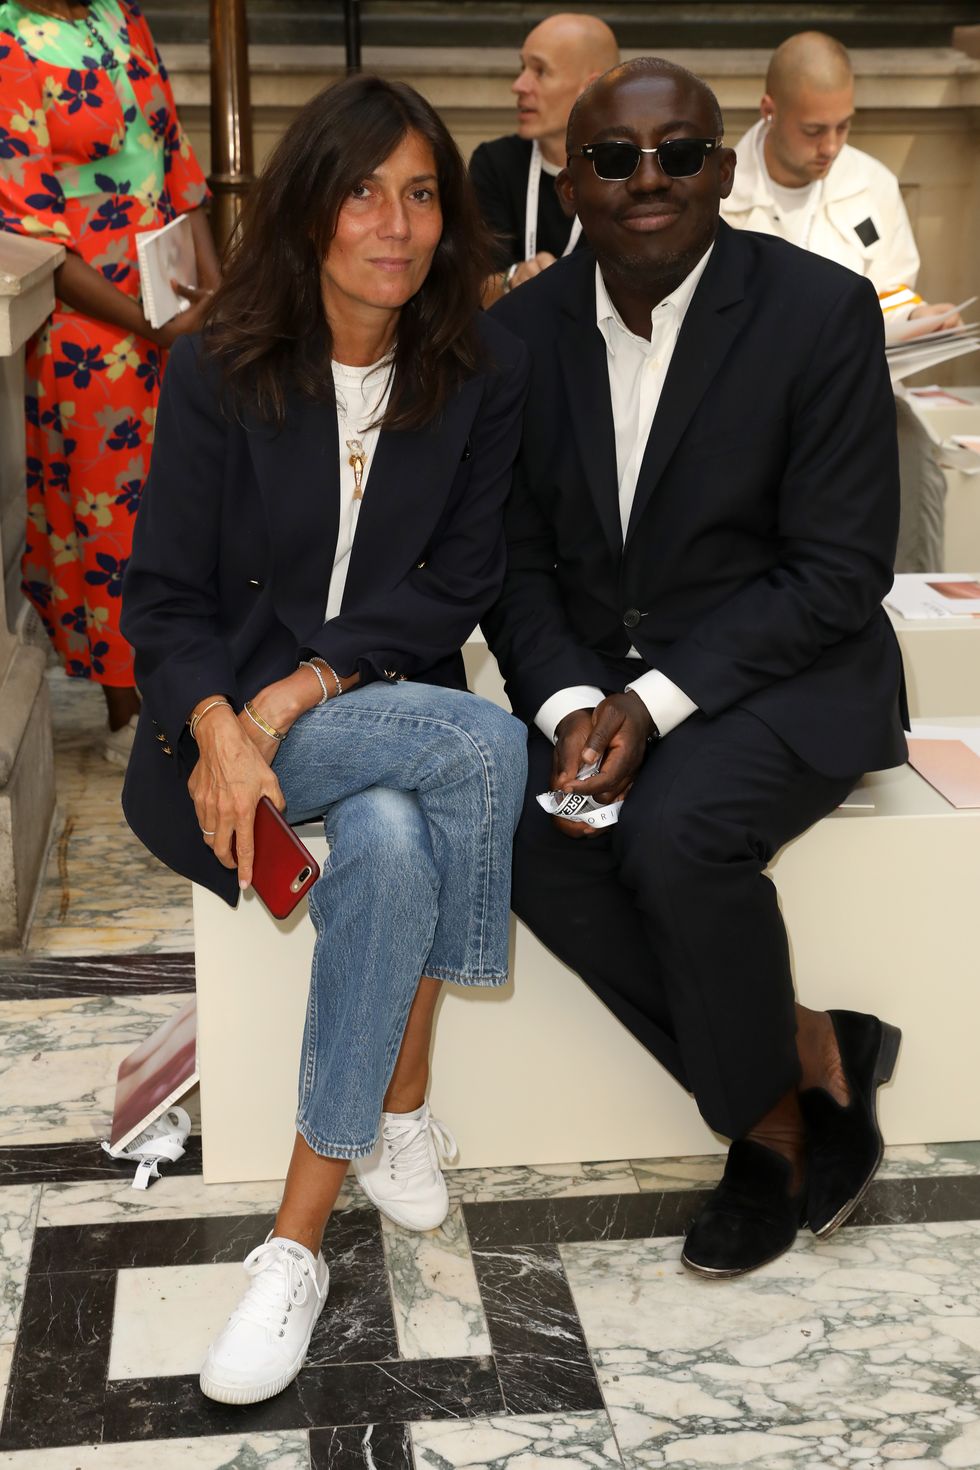 london, england   september 15 l r emmanuelle alt and edward enninful attend the victoria beckham show during london fashion week september 2019 at british foreign and commonwealth office on september 15, 2019 in london, england photo by darren gerrishwireimage